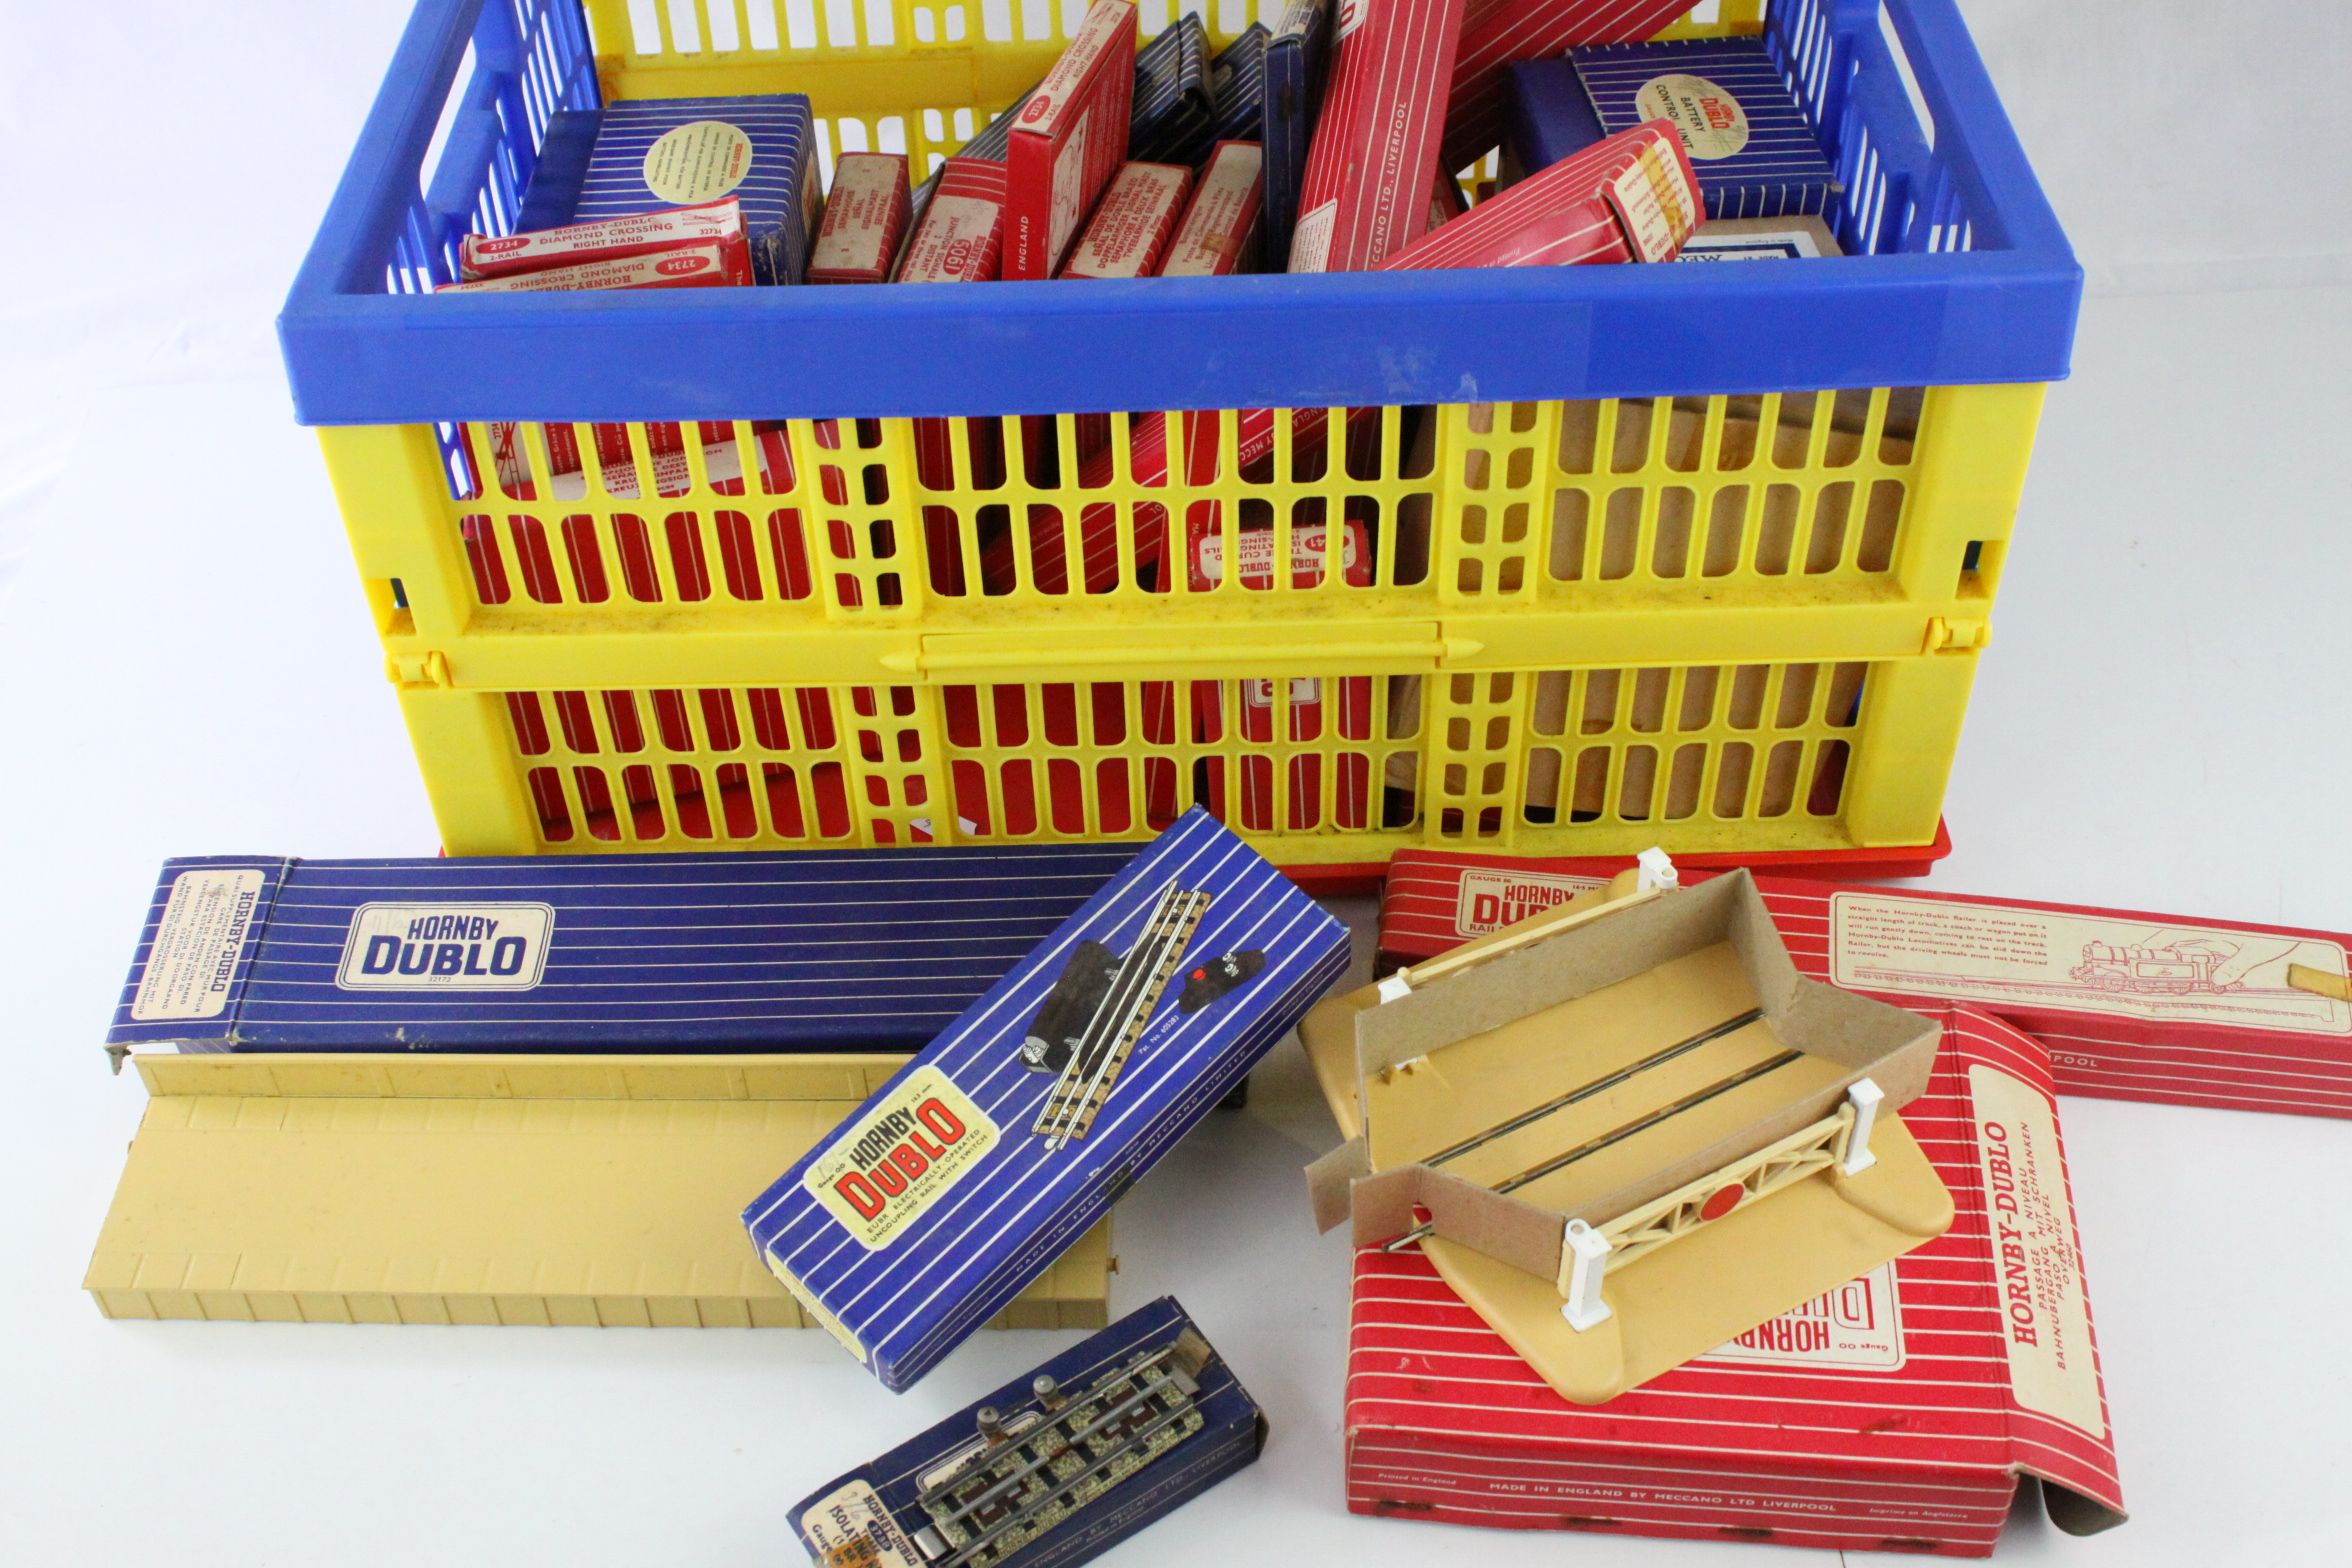 29 Boxed Hornby Dublo moel rail items of accessories to include Level Crossing, Crossing, track,